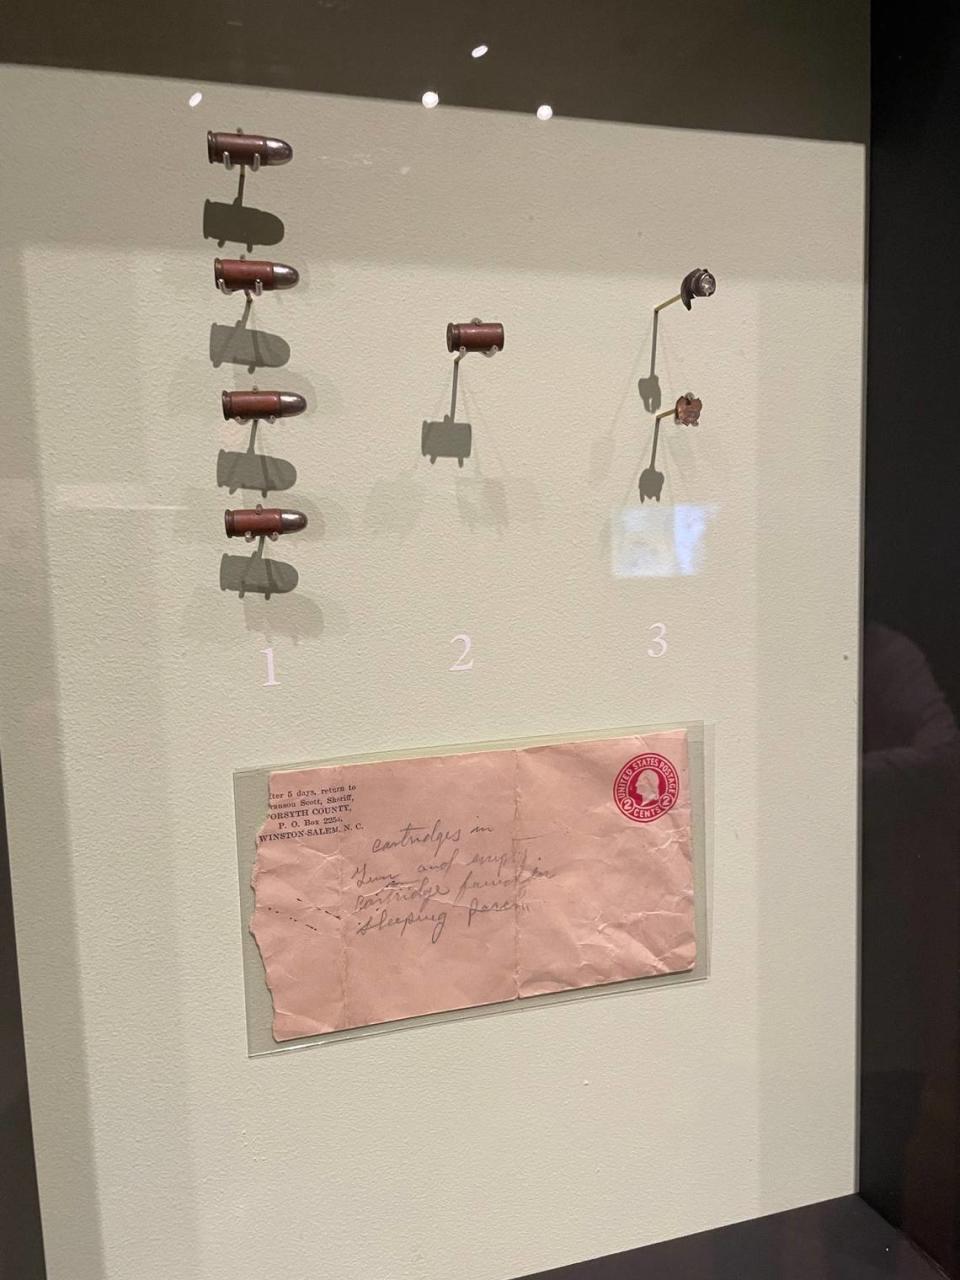 Bullet fragments from the shooting of Z. Smith Reynolds on display at the Reynolda House Museum of American Art, part of the “Smith & Libby: Two Rings, Seven Months, One Bullet” exhibit that runs through December 31, 2023.